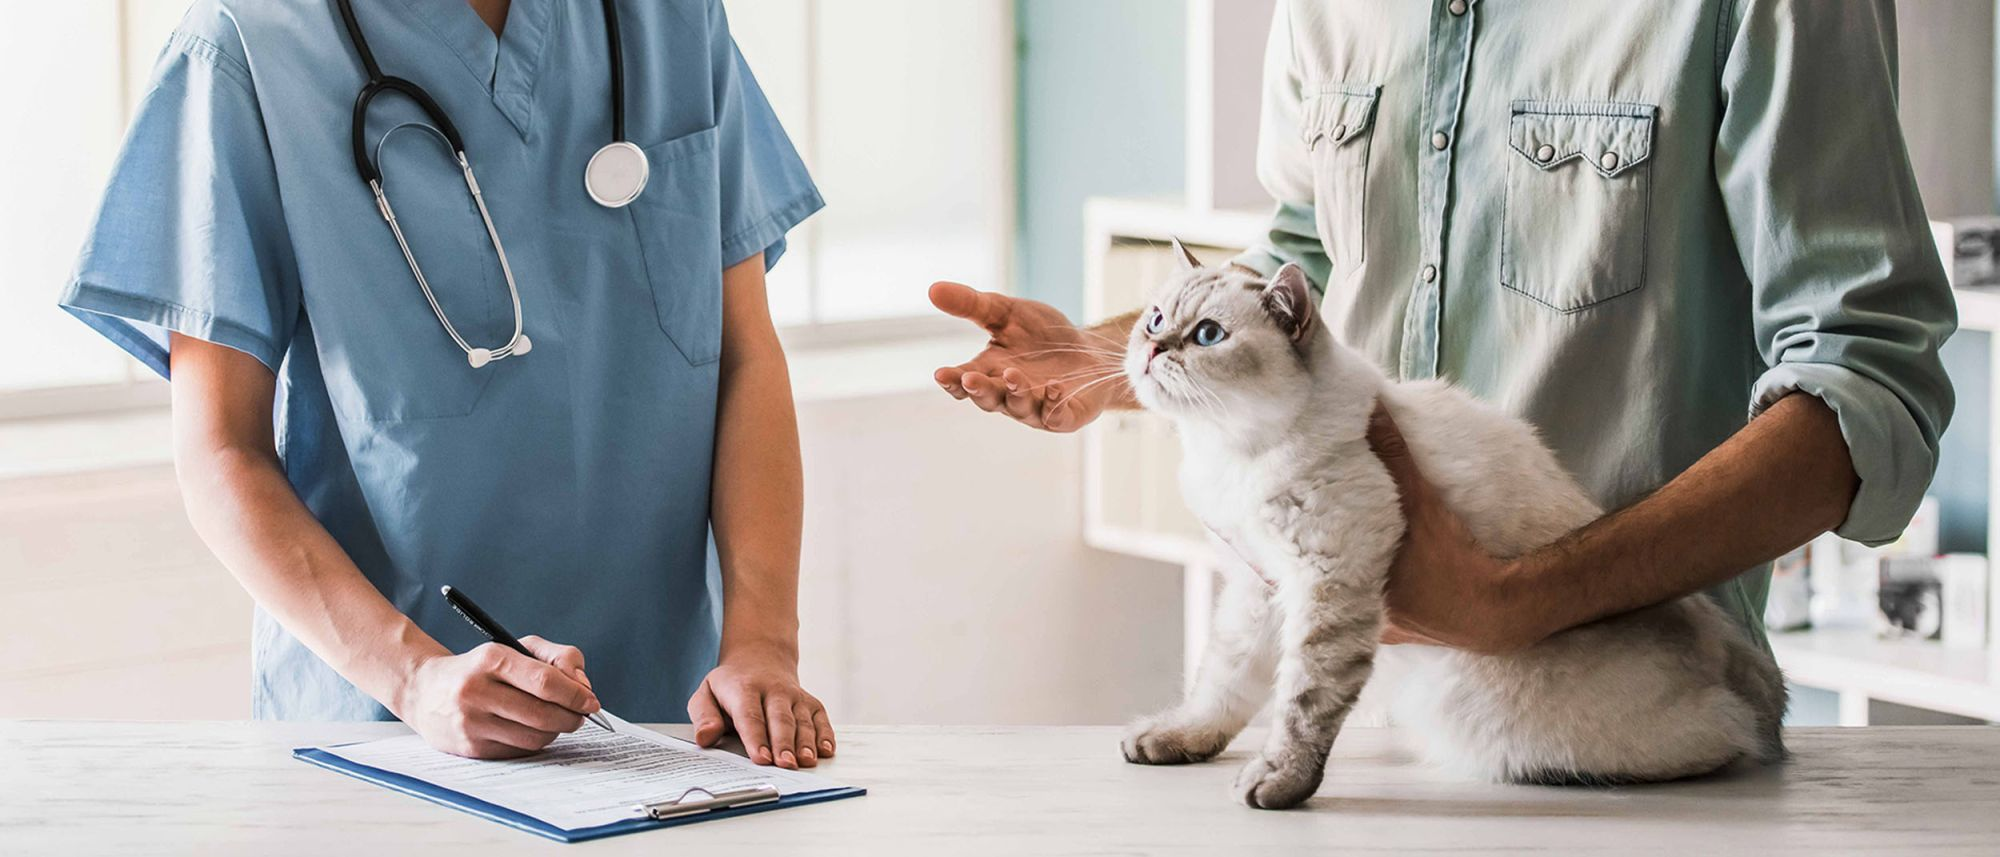 Adult British Shorthair sitting on an examination table while owner speaks with the vet